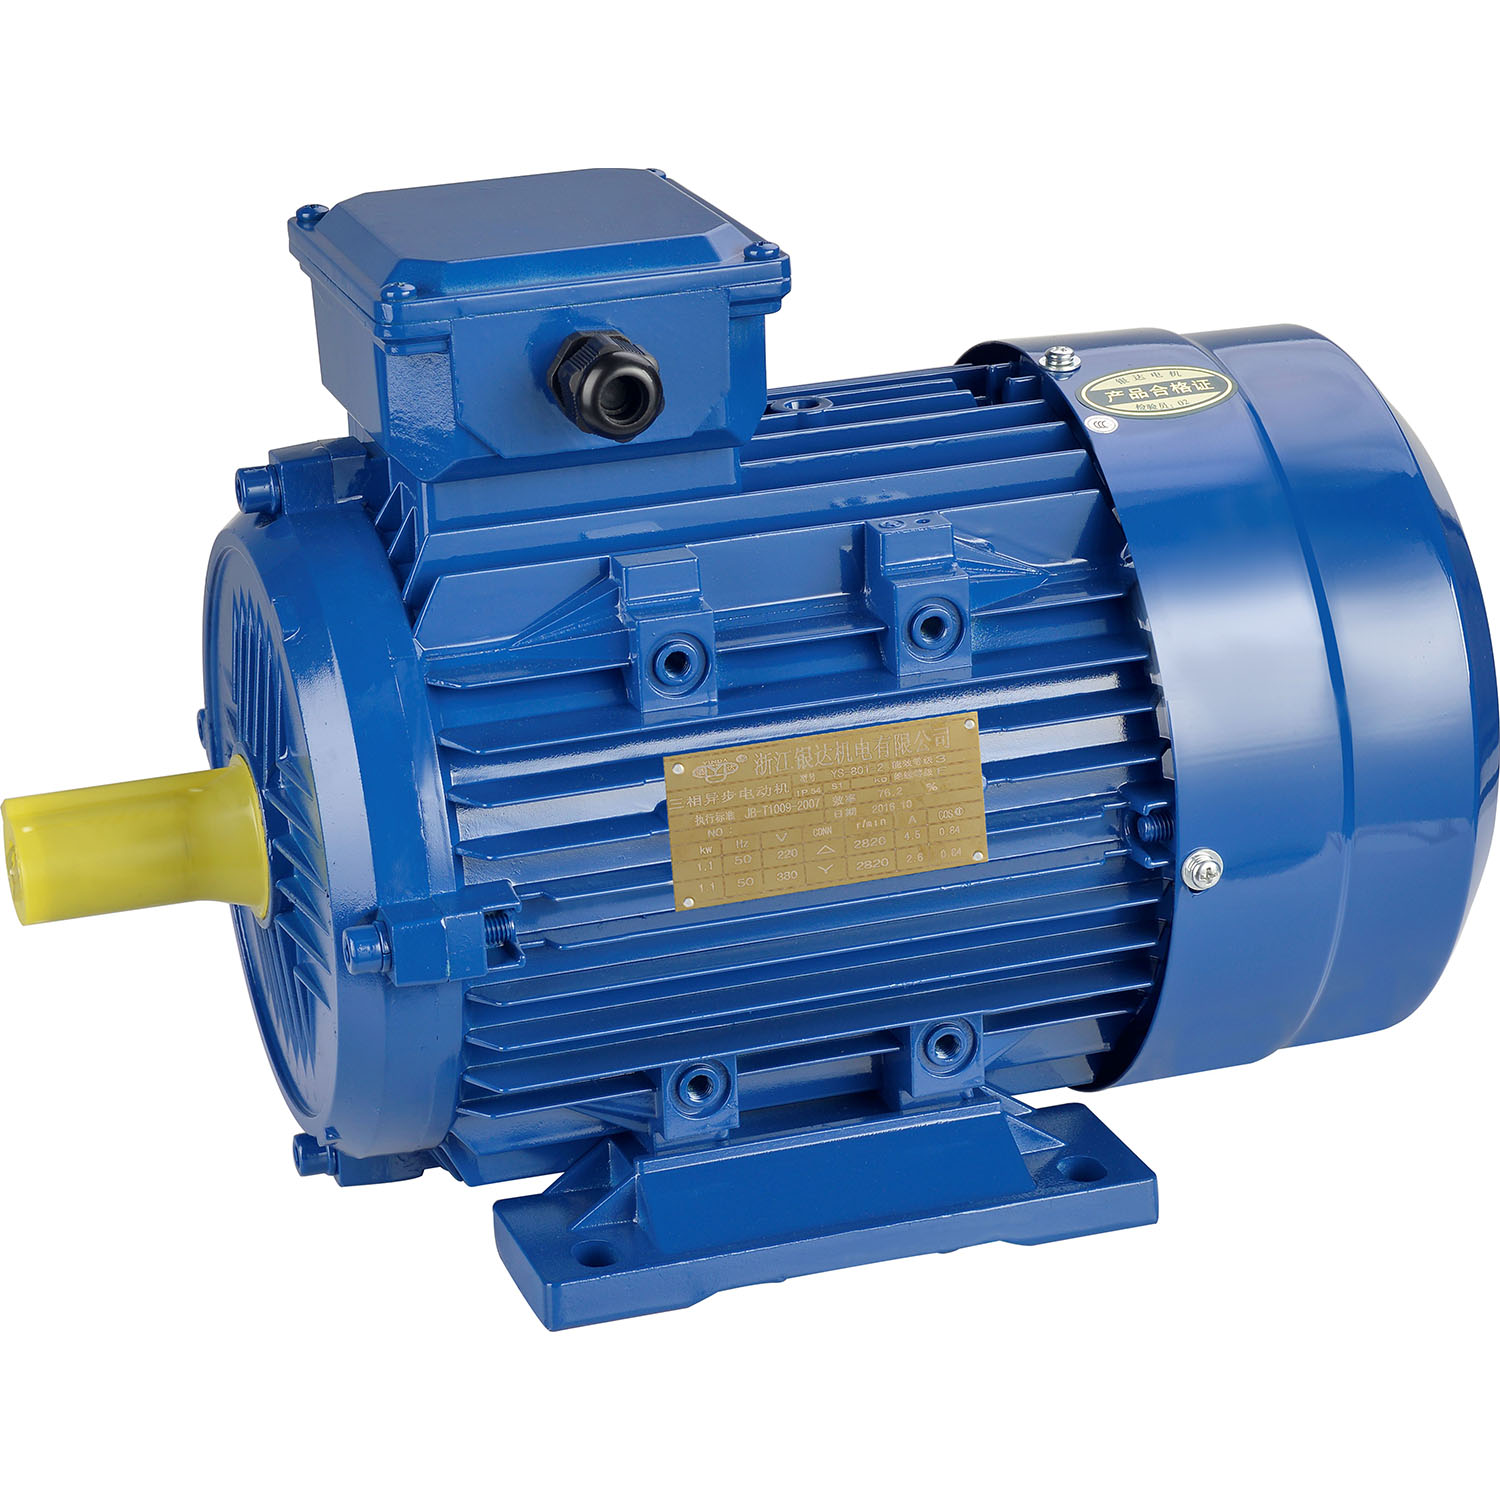 YX3-132S1-2 5.5KW 7.5HP aluminum cylinder series high efficiency three-phase asynchronous motor